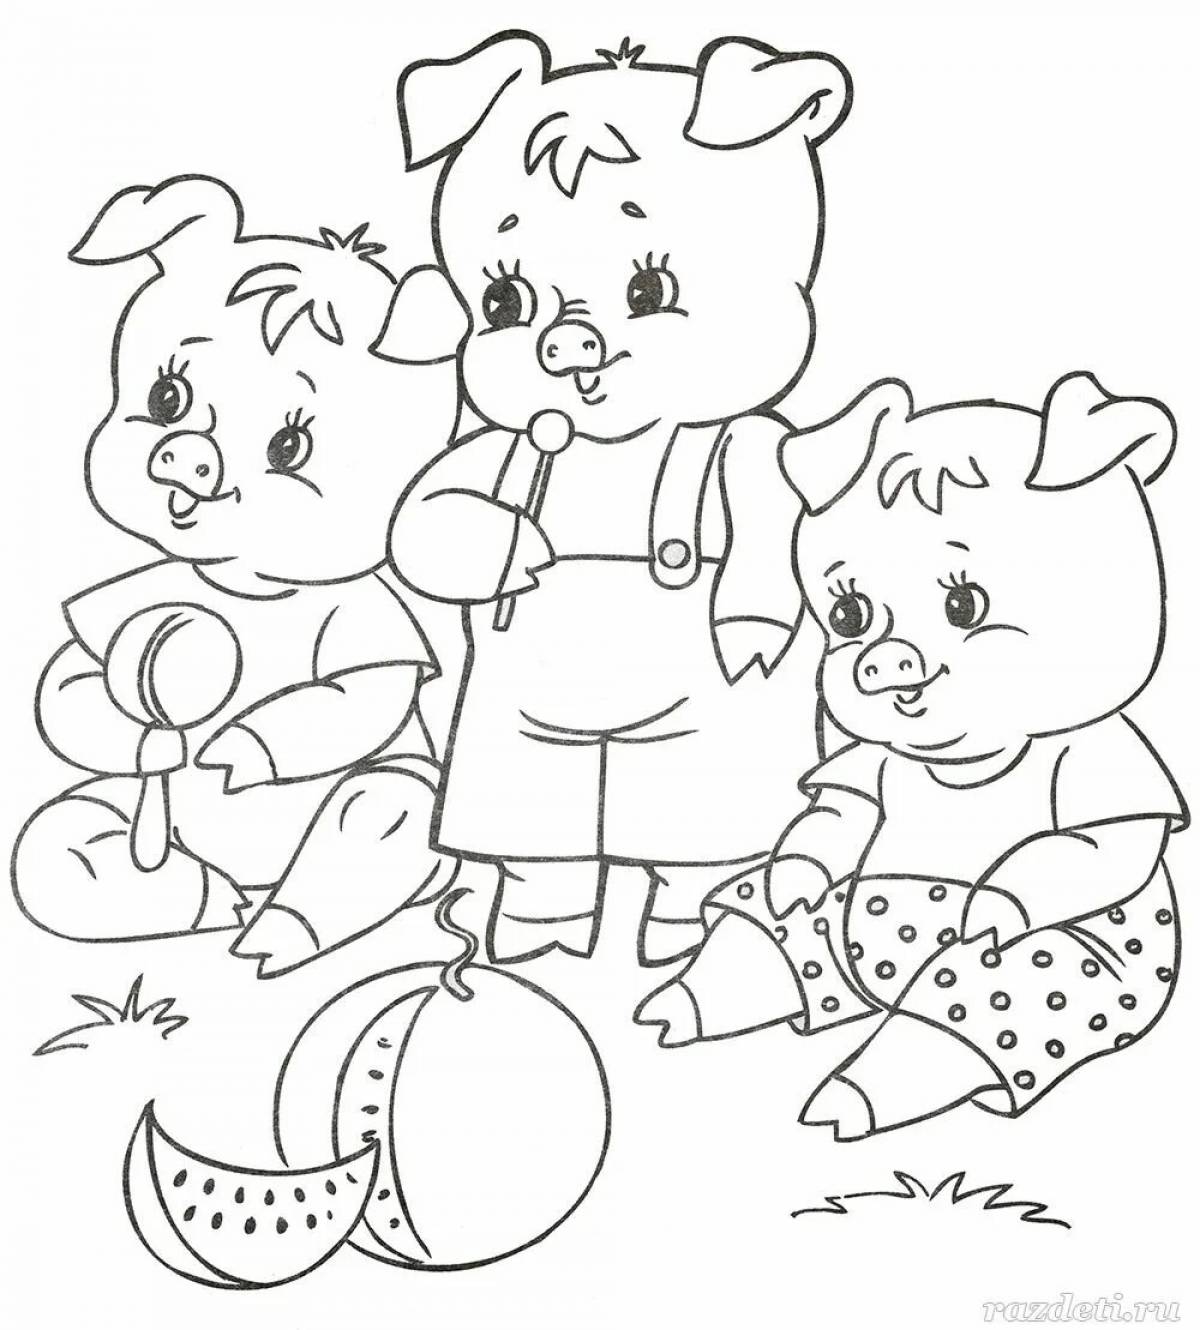 Outstanding coloring 3 little pigs for kids